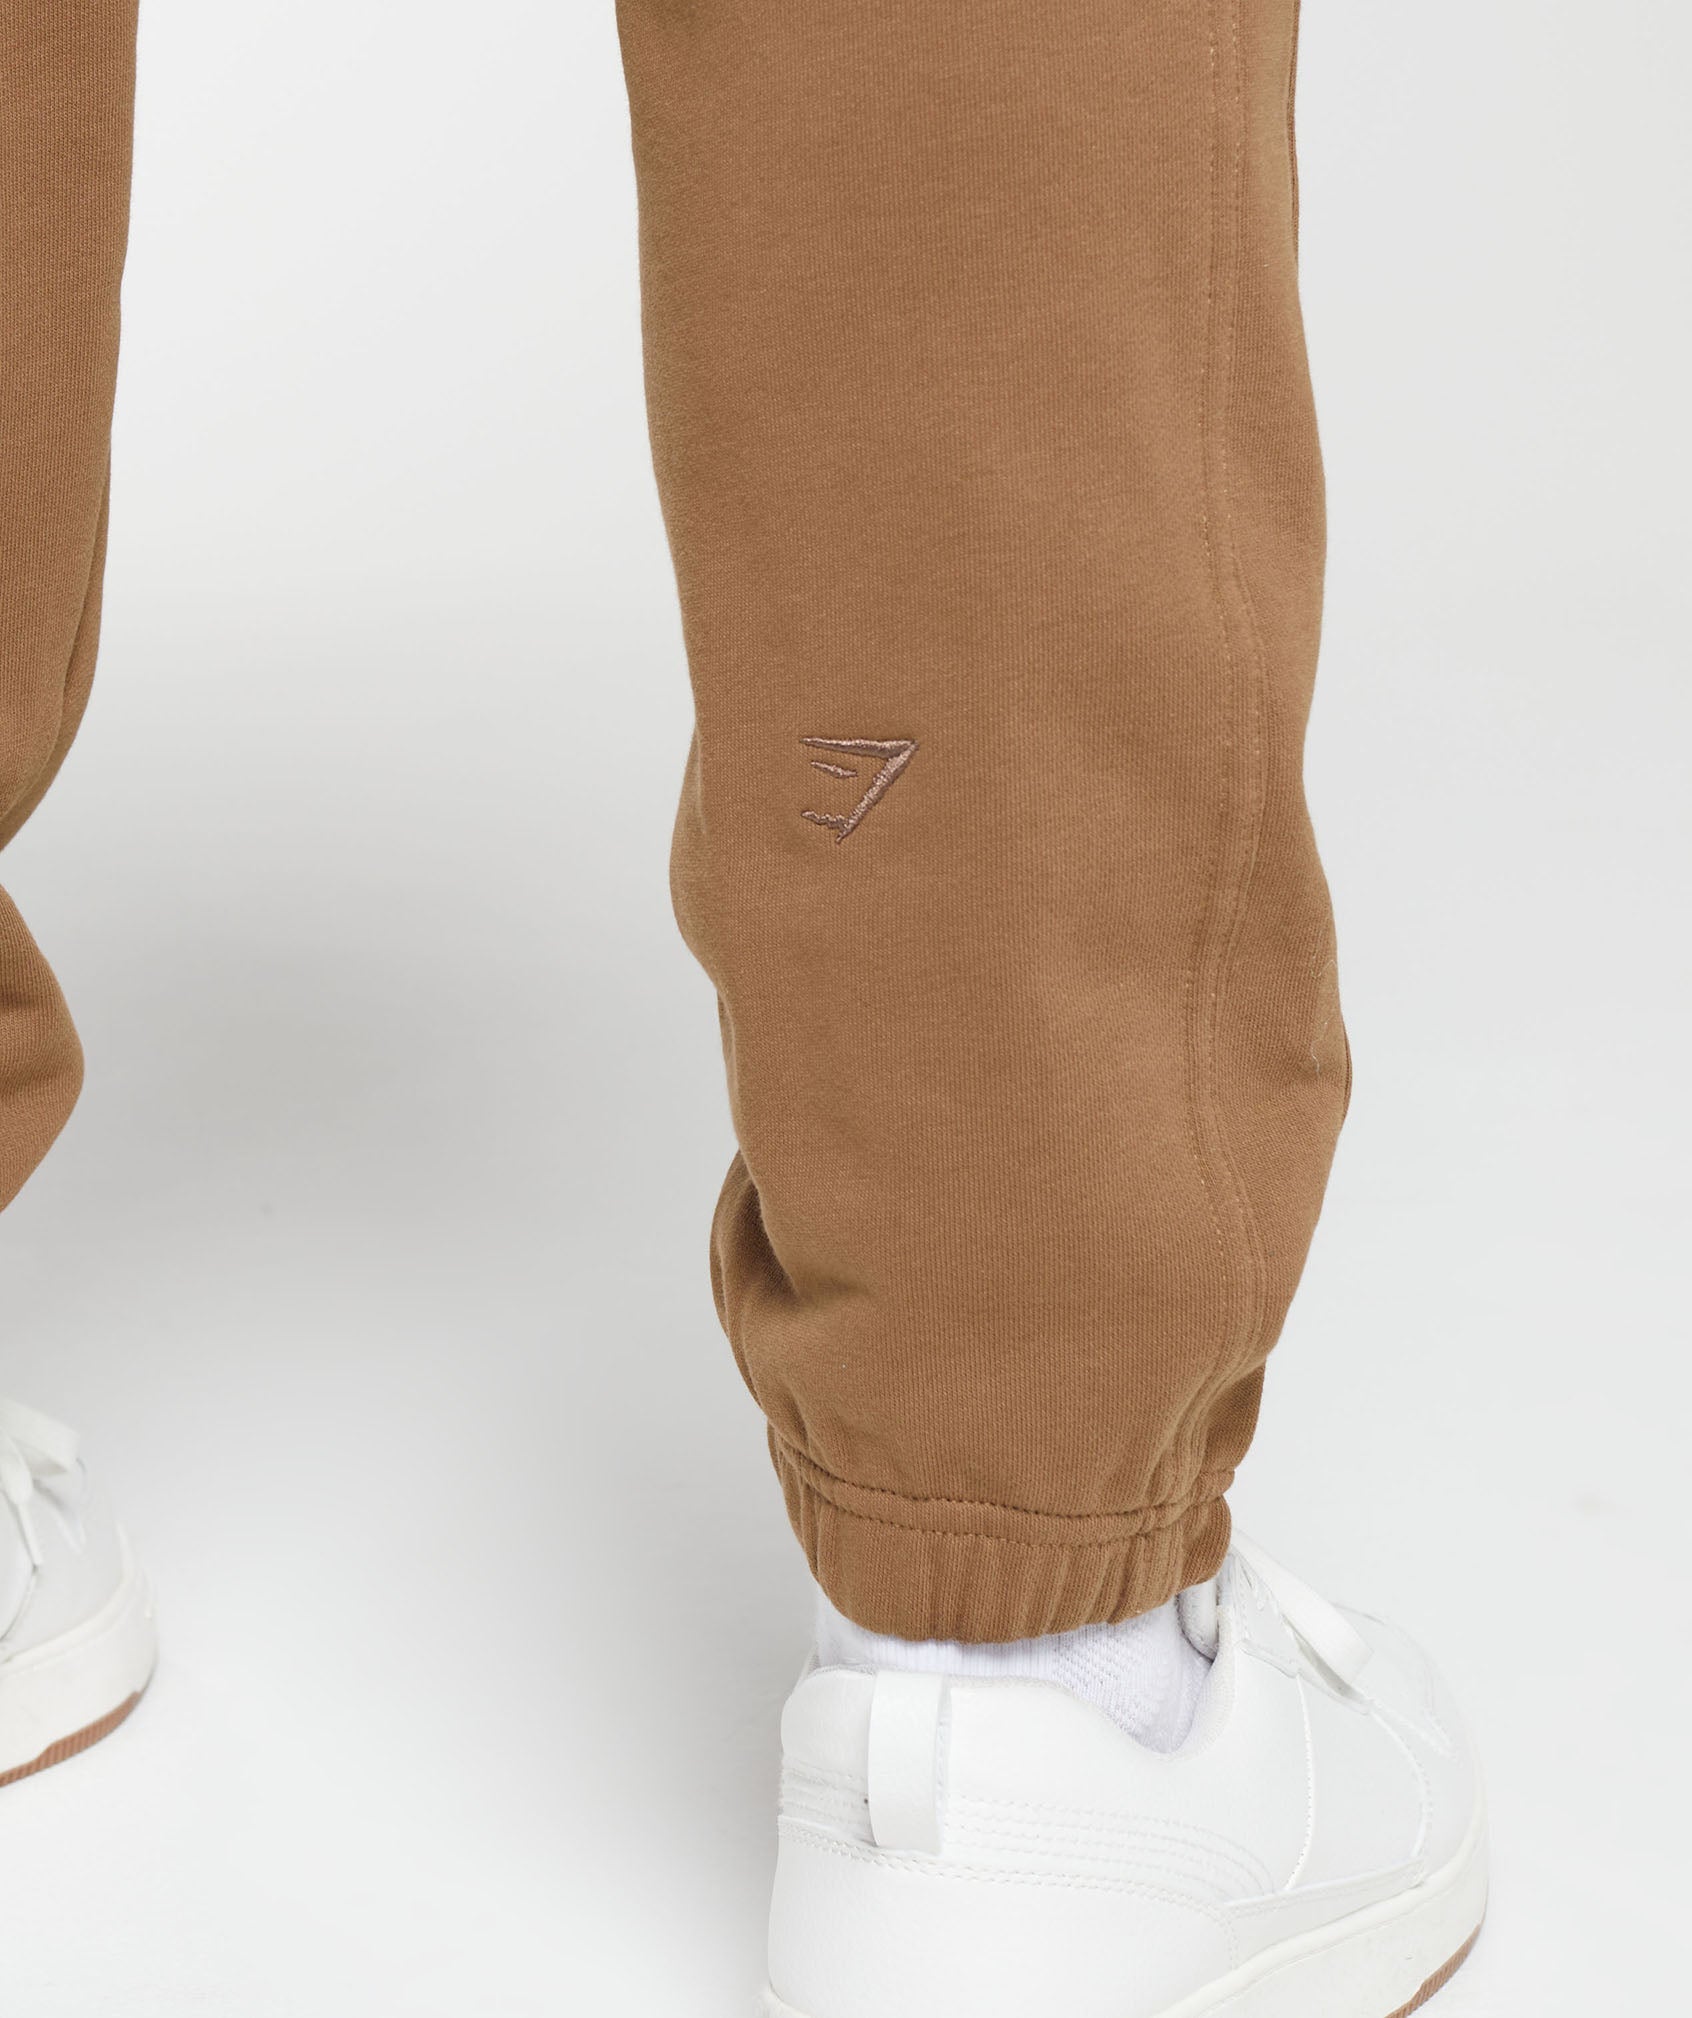 Rest Day Essentials Joggers in Caramel Brown - view 5